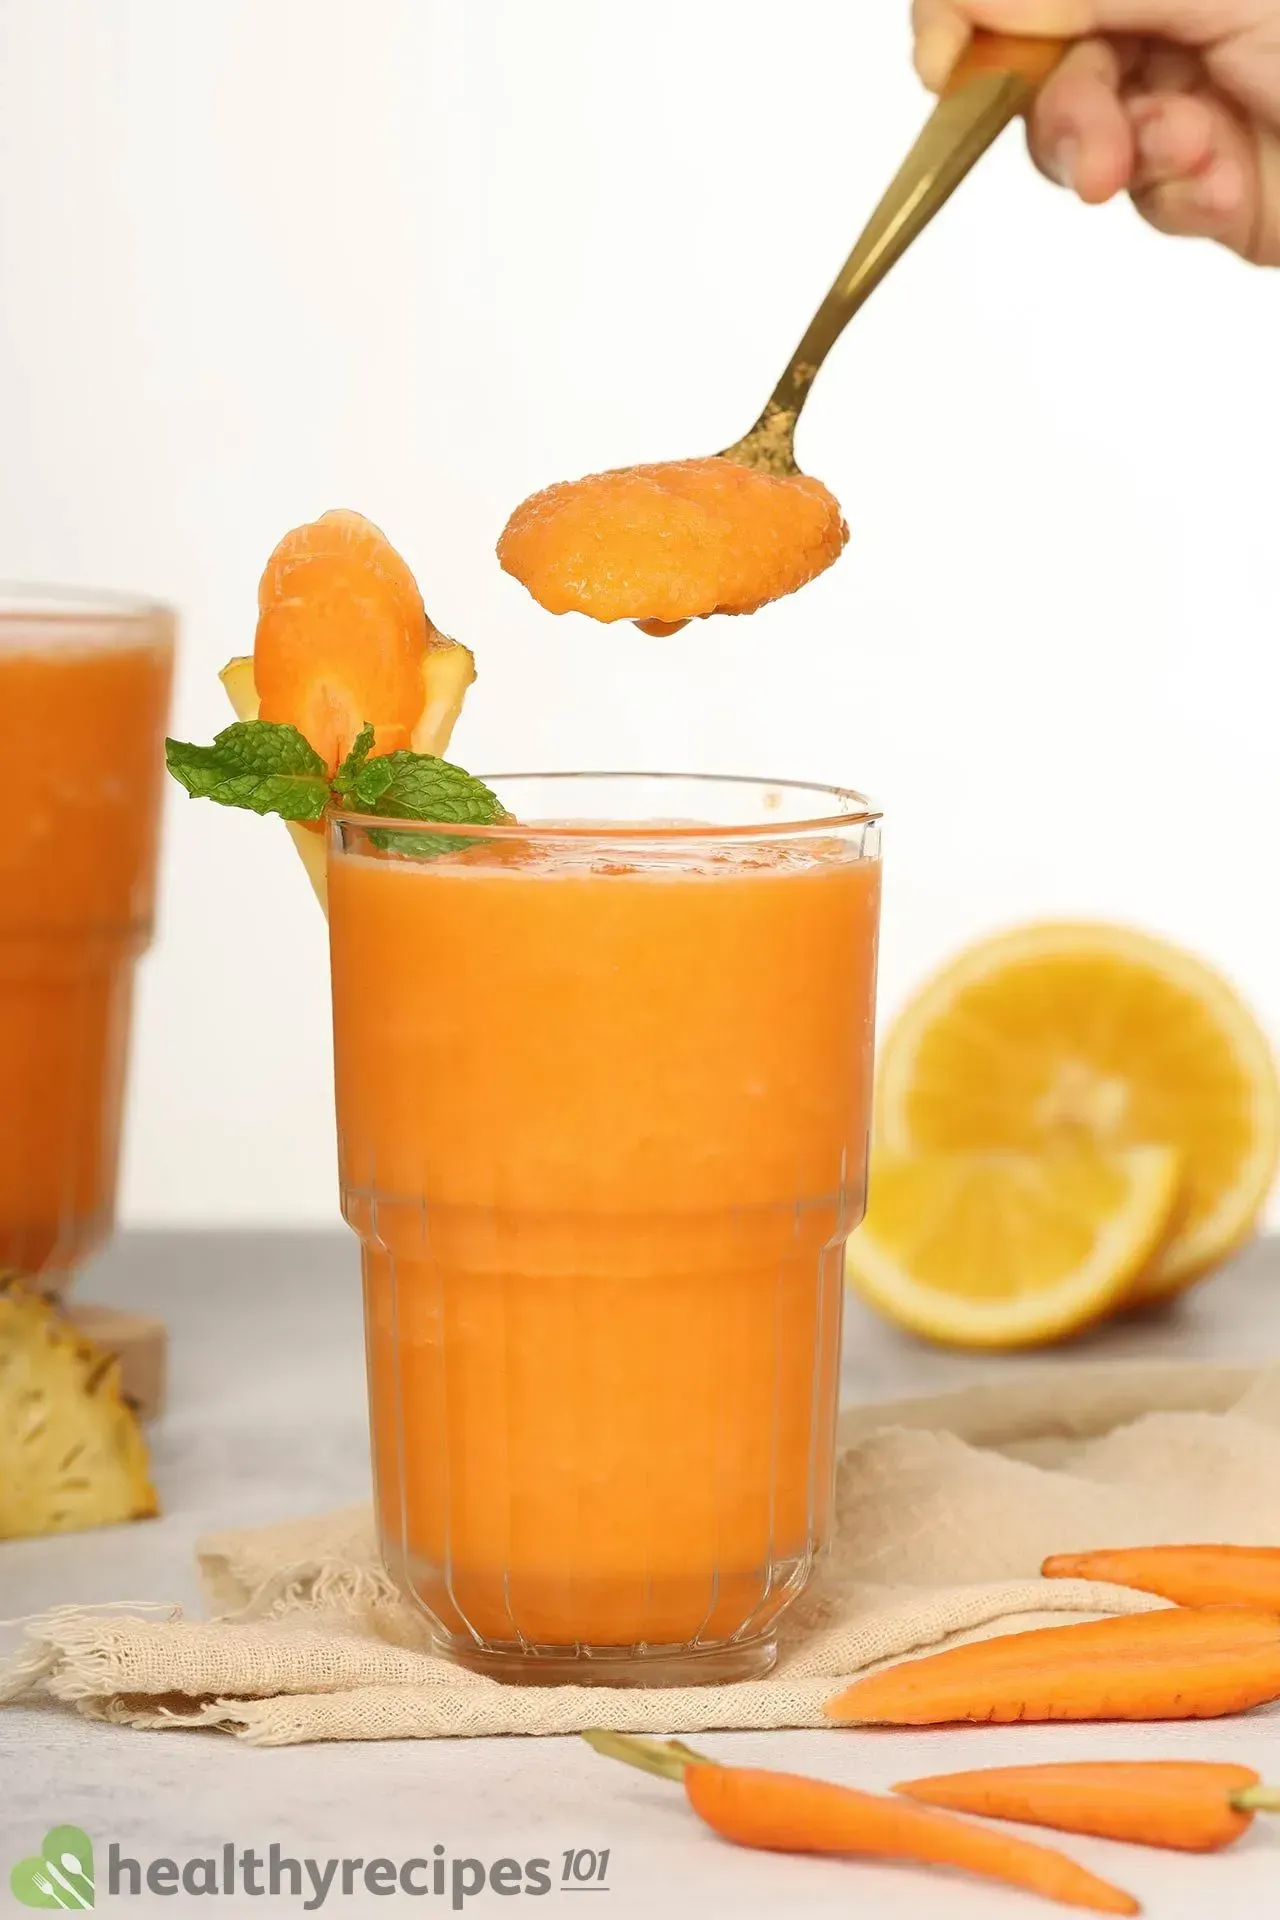 Carrot Smoothie Recipe: A Healthy Drink With a Summery Flavor